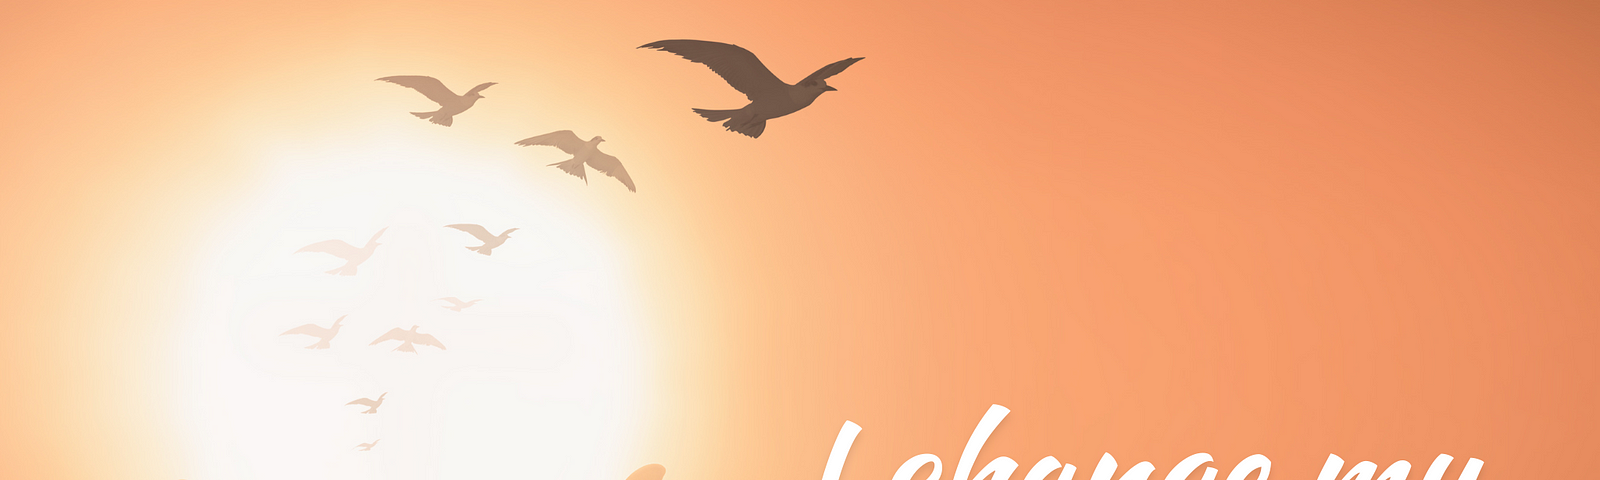 orange background with birds flying at top of image. In lower left, hands raised up toward the sky holding a ball of light. To right: “I change my thinking as I change my life”